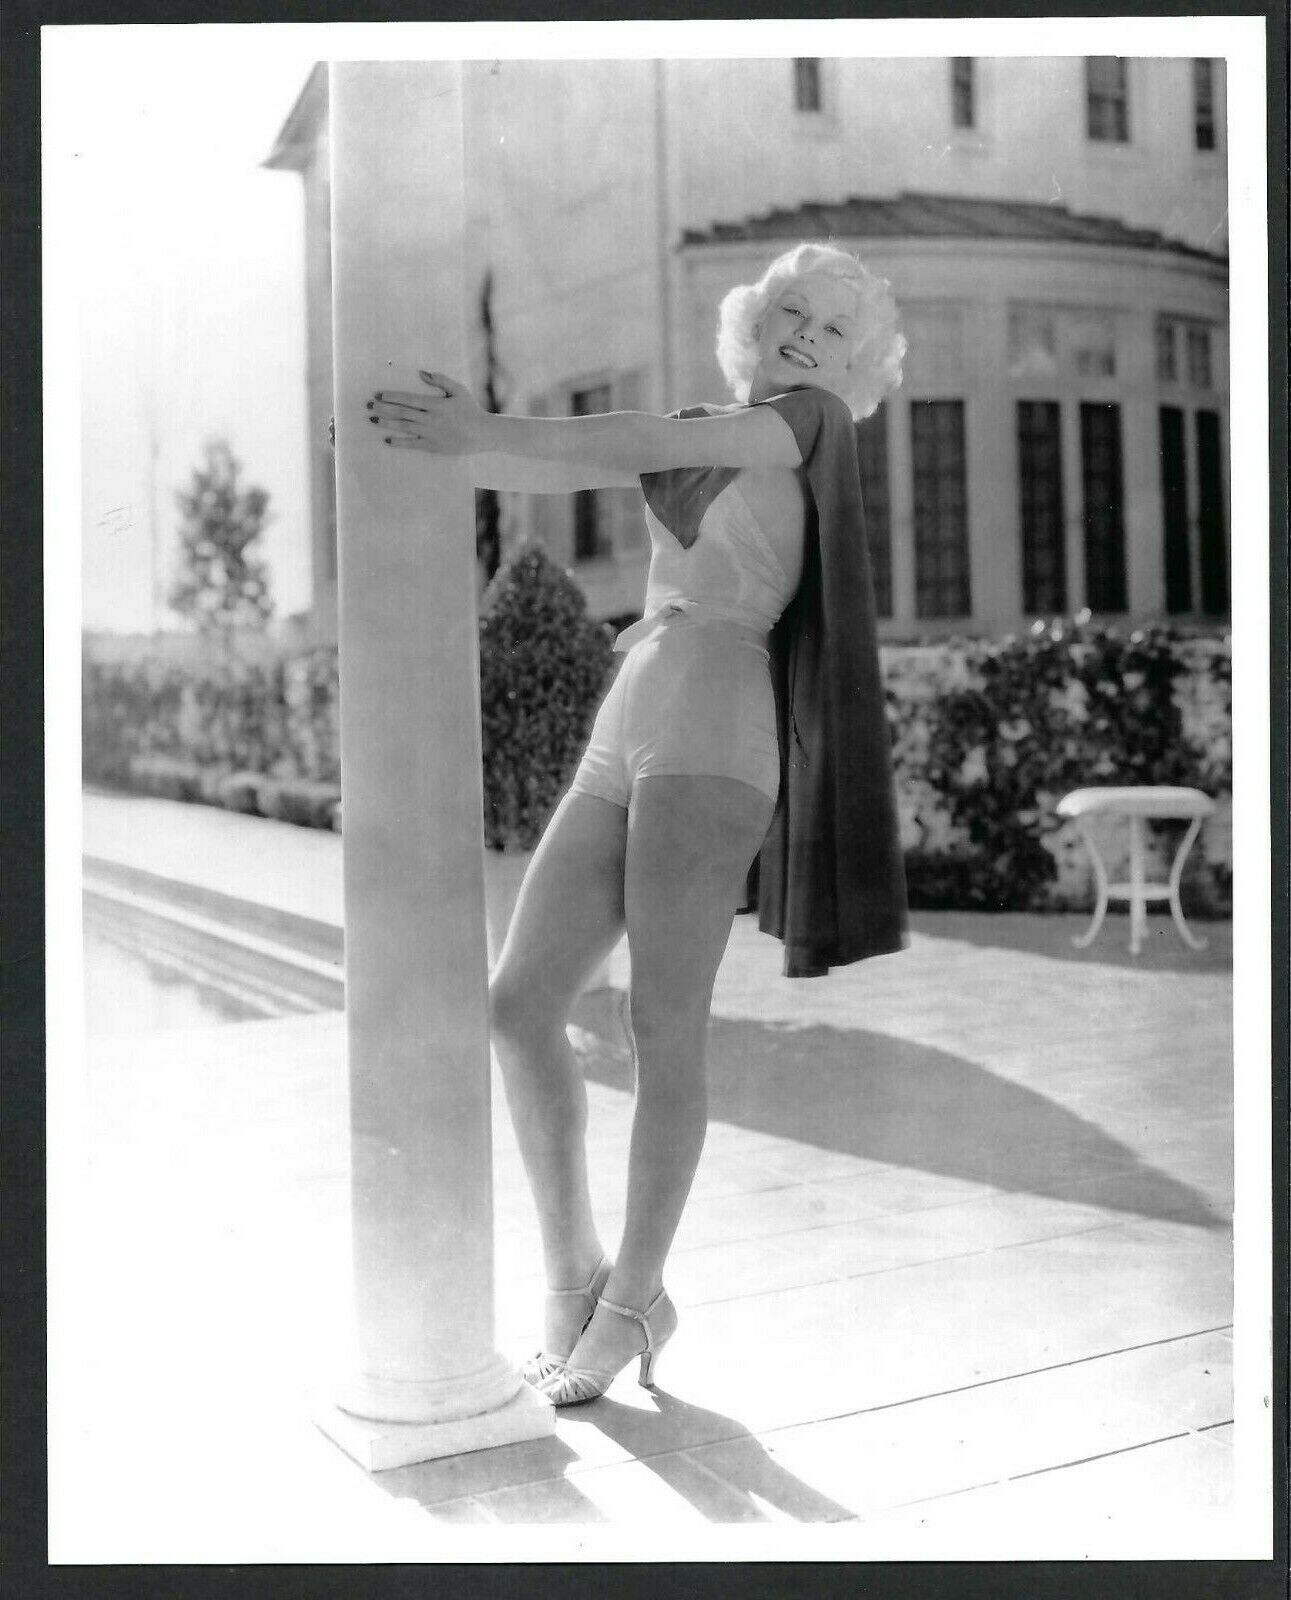 JEAN HARLOW ACTRESS IN SEXY POSE EXQUISITE PHOTO PORTRAIT